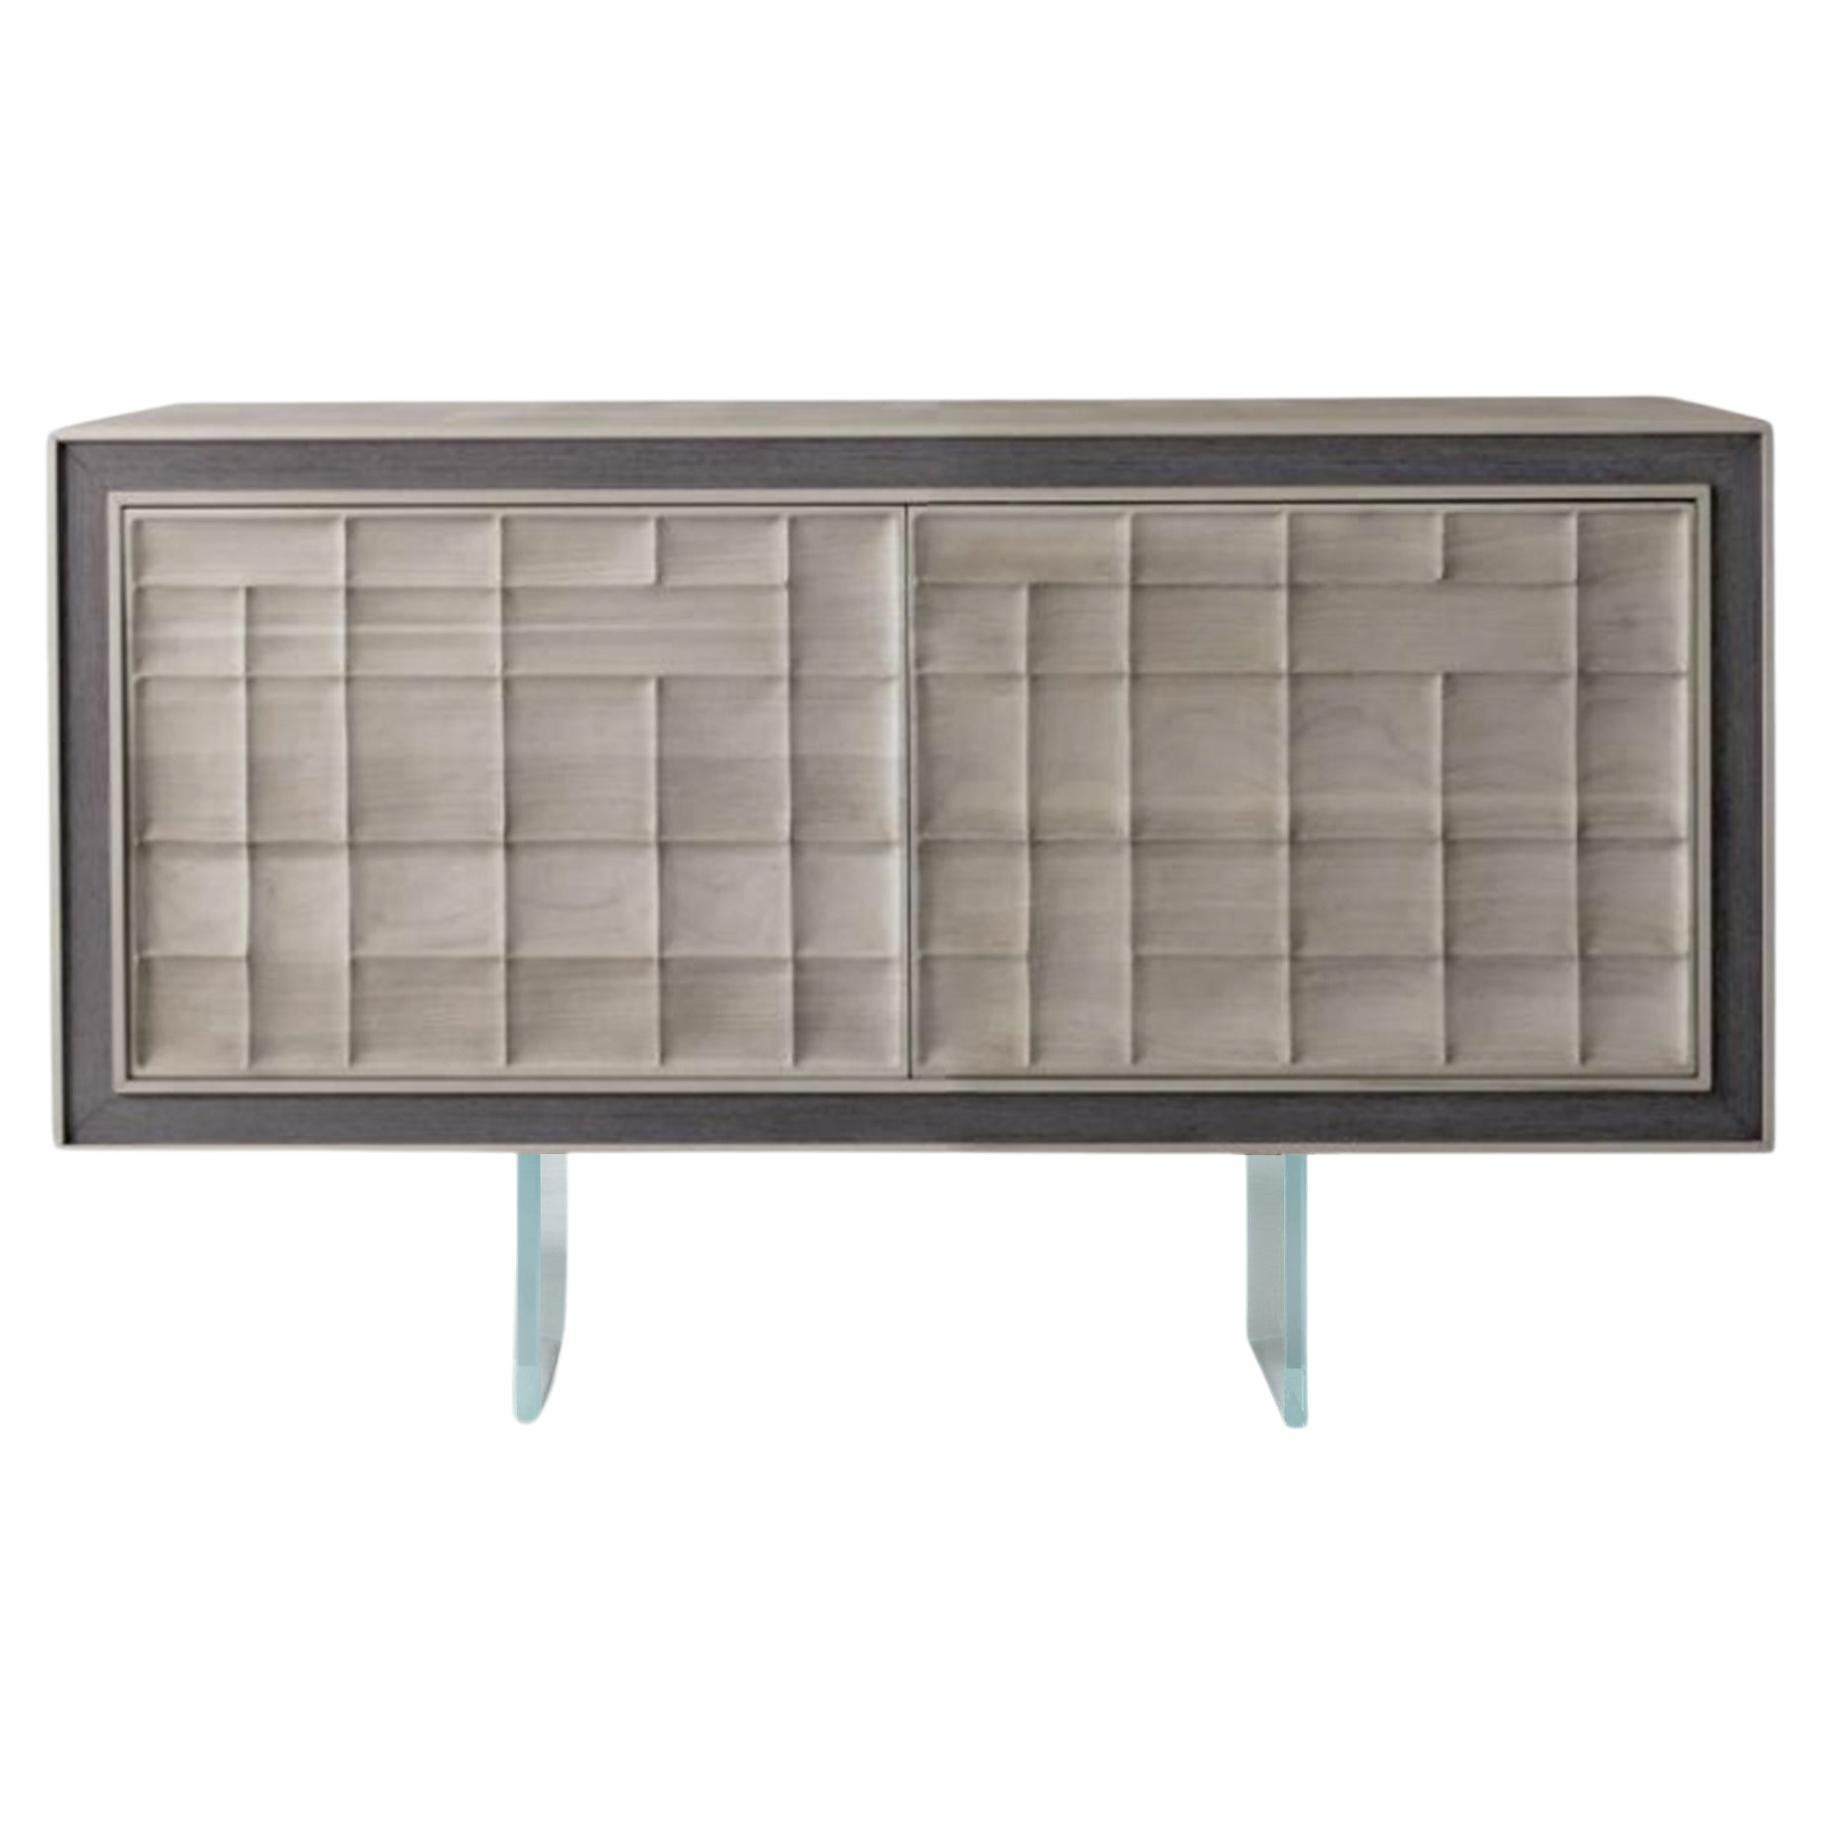 Quadra Scacco Solid Wood Sideboard, Walnut in Natural Grey Finish, Contemporary For Sale